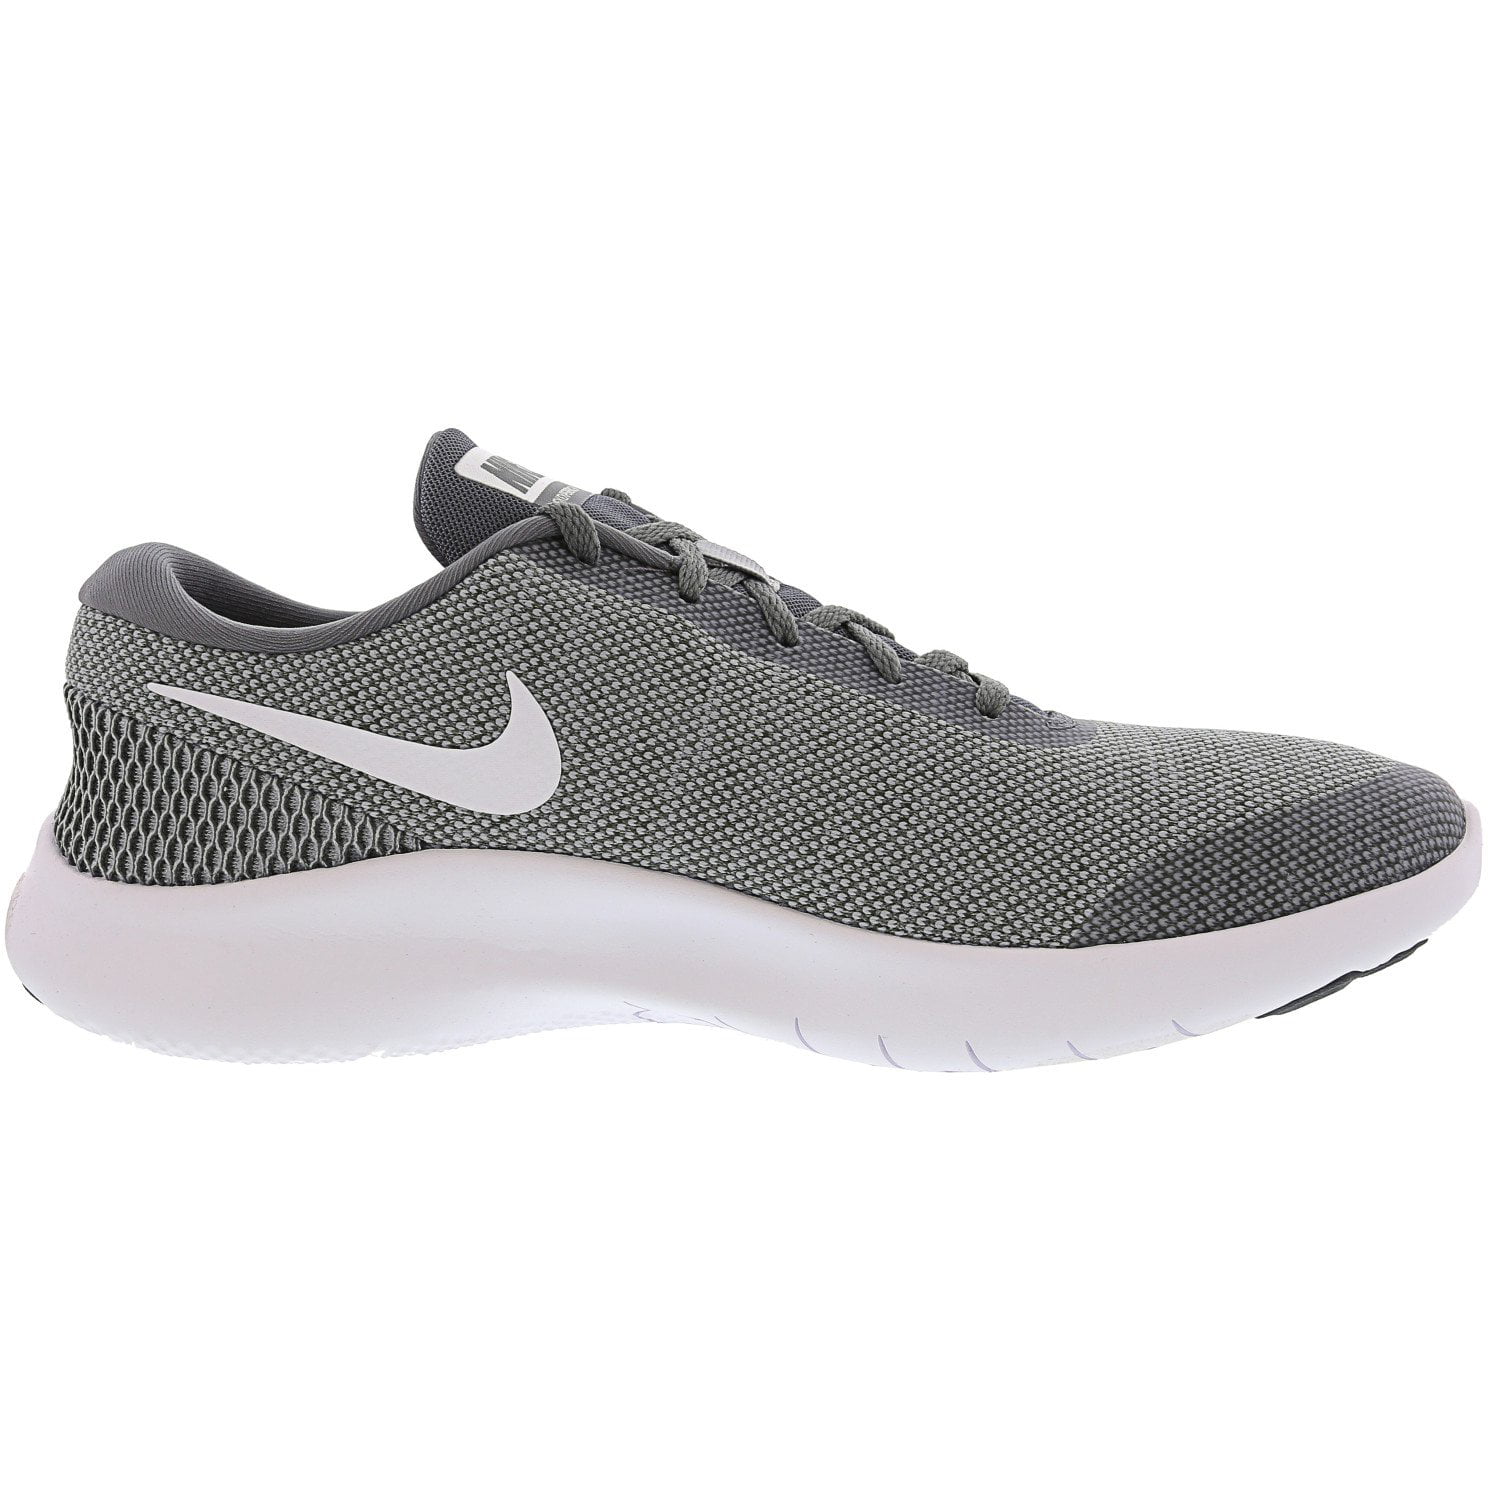 Nike Flex Experience RN 7 Men?s Running Shoes - 10.5M - Wolf Grey / White /  Cool Grey